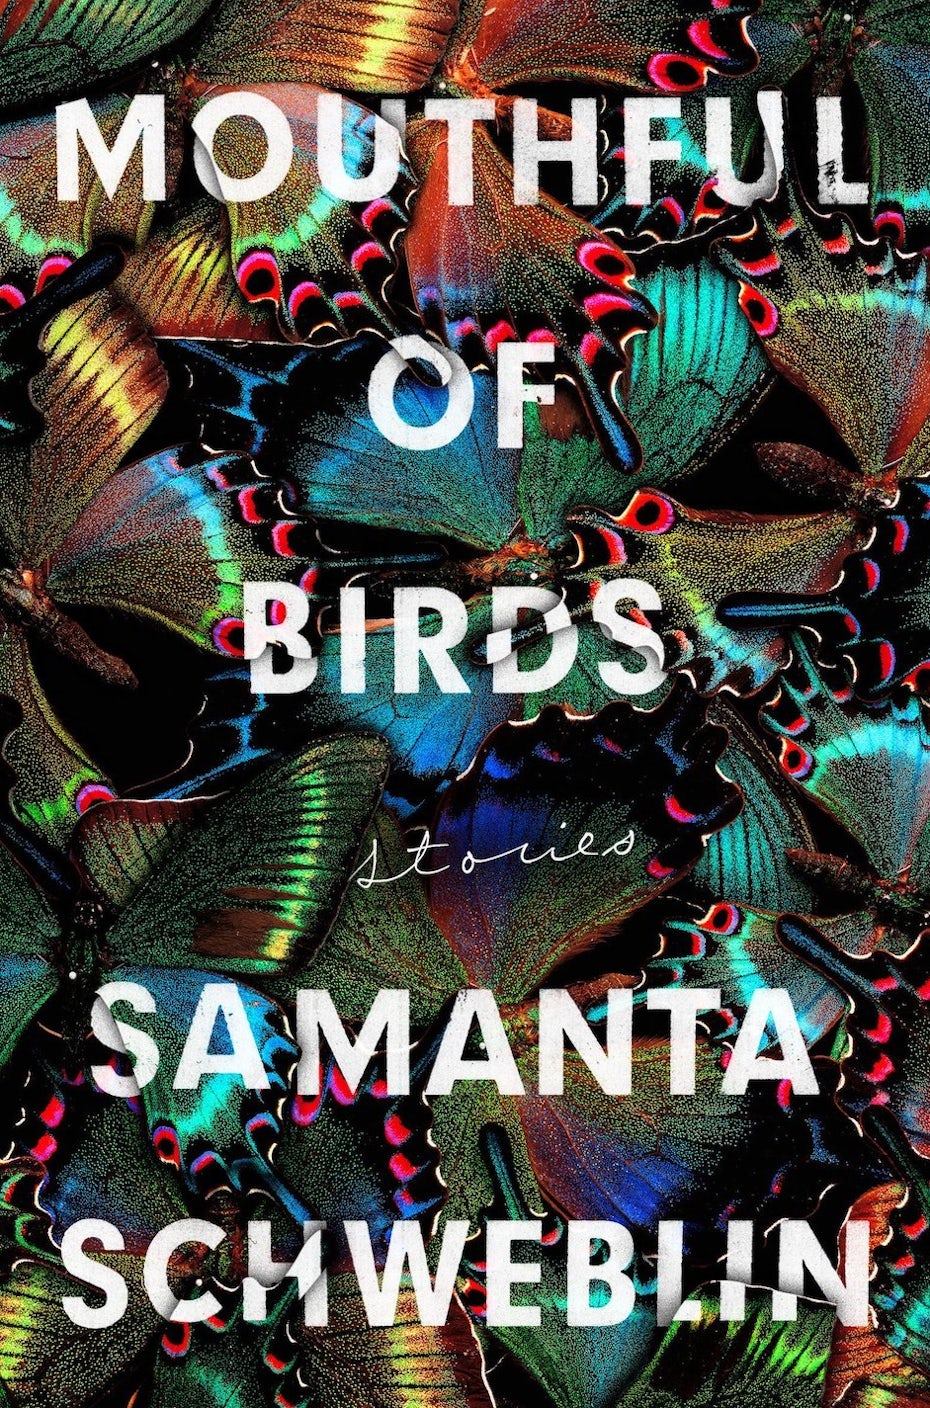 book cover trends 2020 example with texture made of butterflies